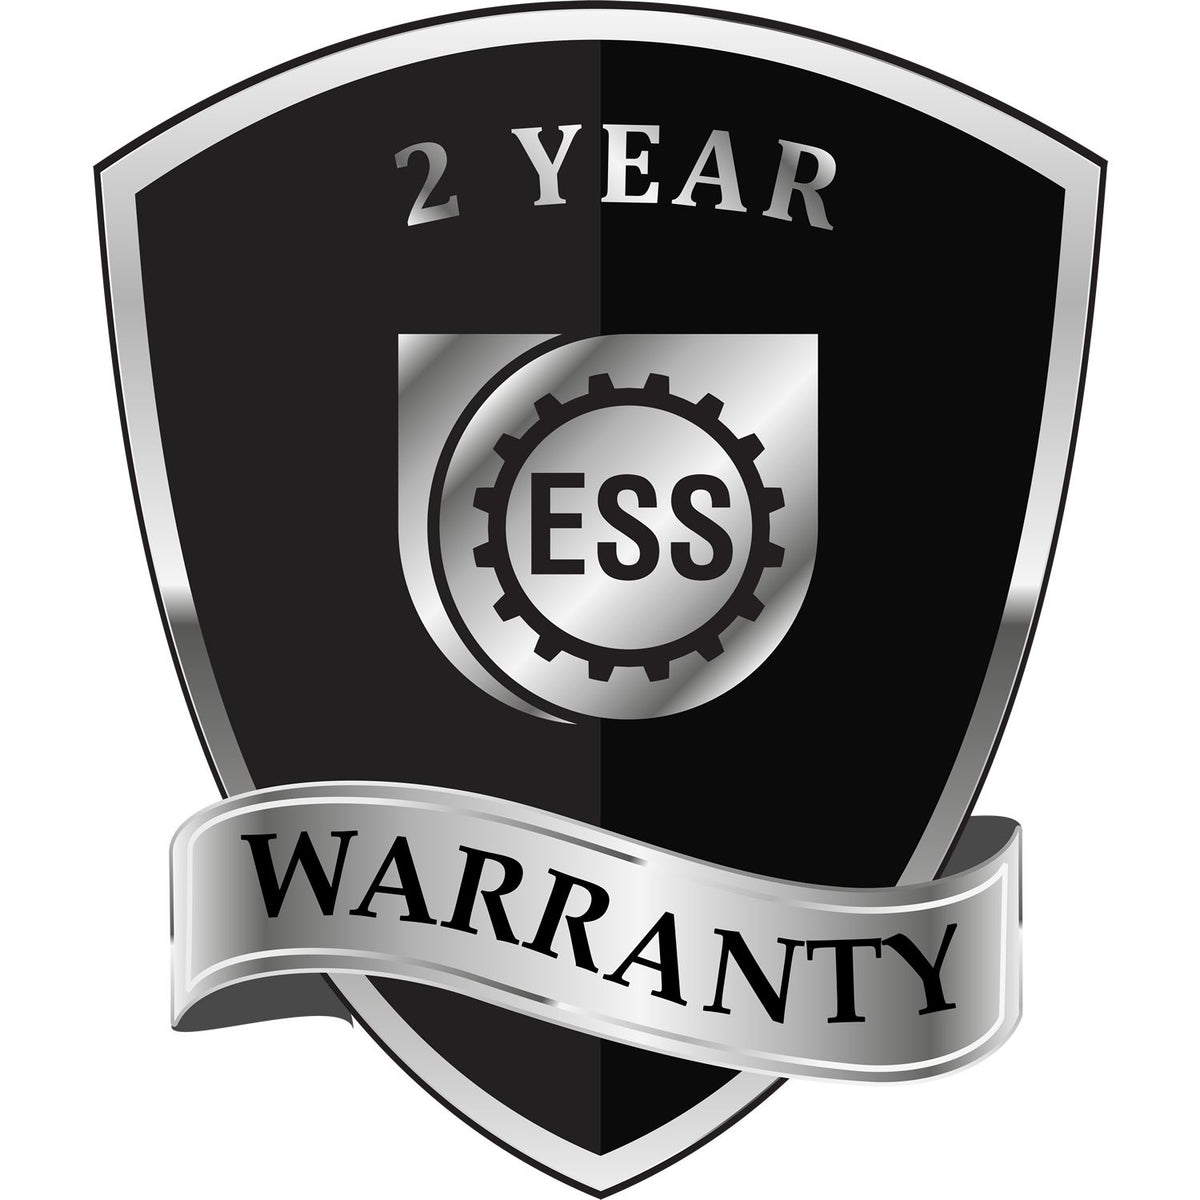 A black and silver badge or emblem showing warranty information for the Hybrid Georgia Landscape Architect Seal